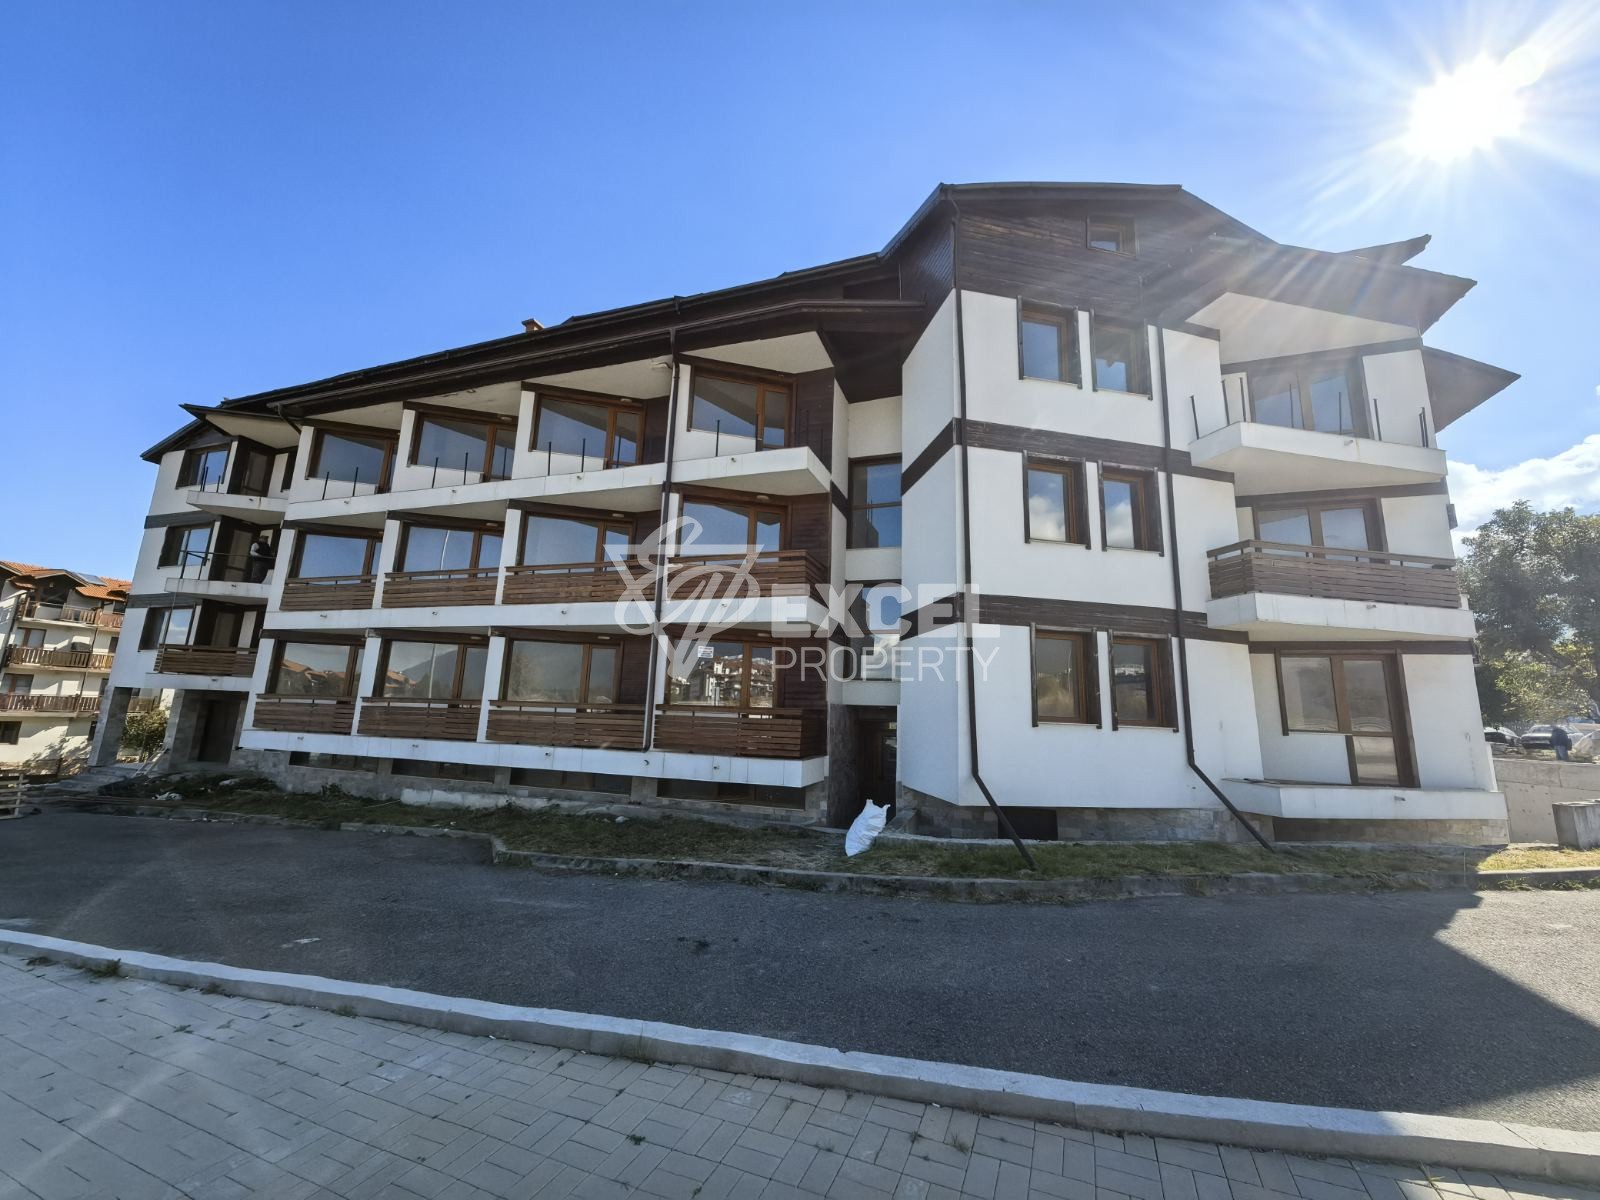 One-bedroom apartment with south exposure, 400m from the ski lift in Bansko